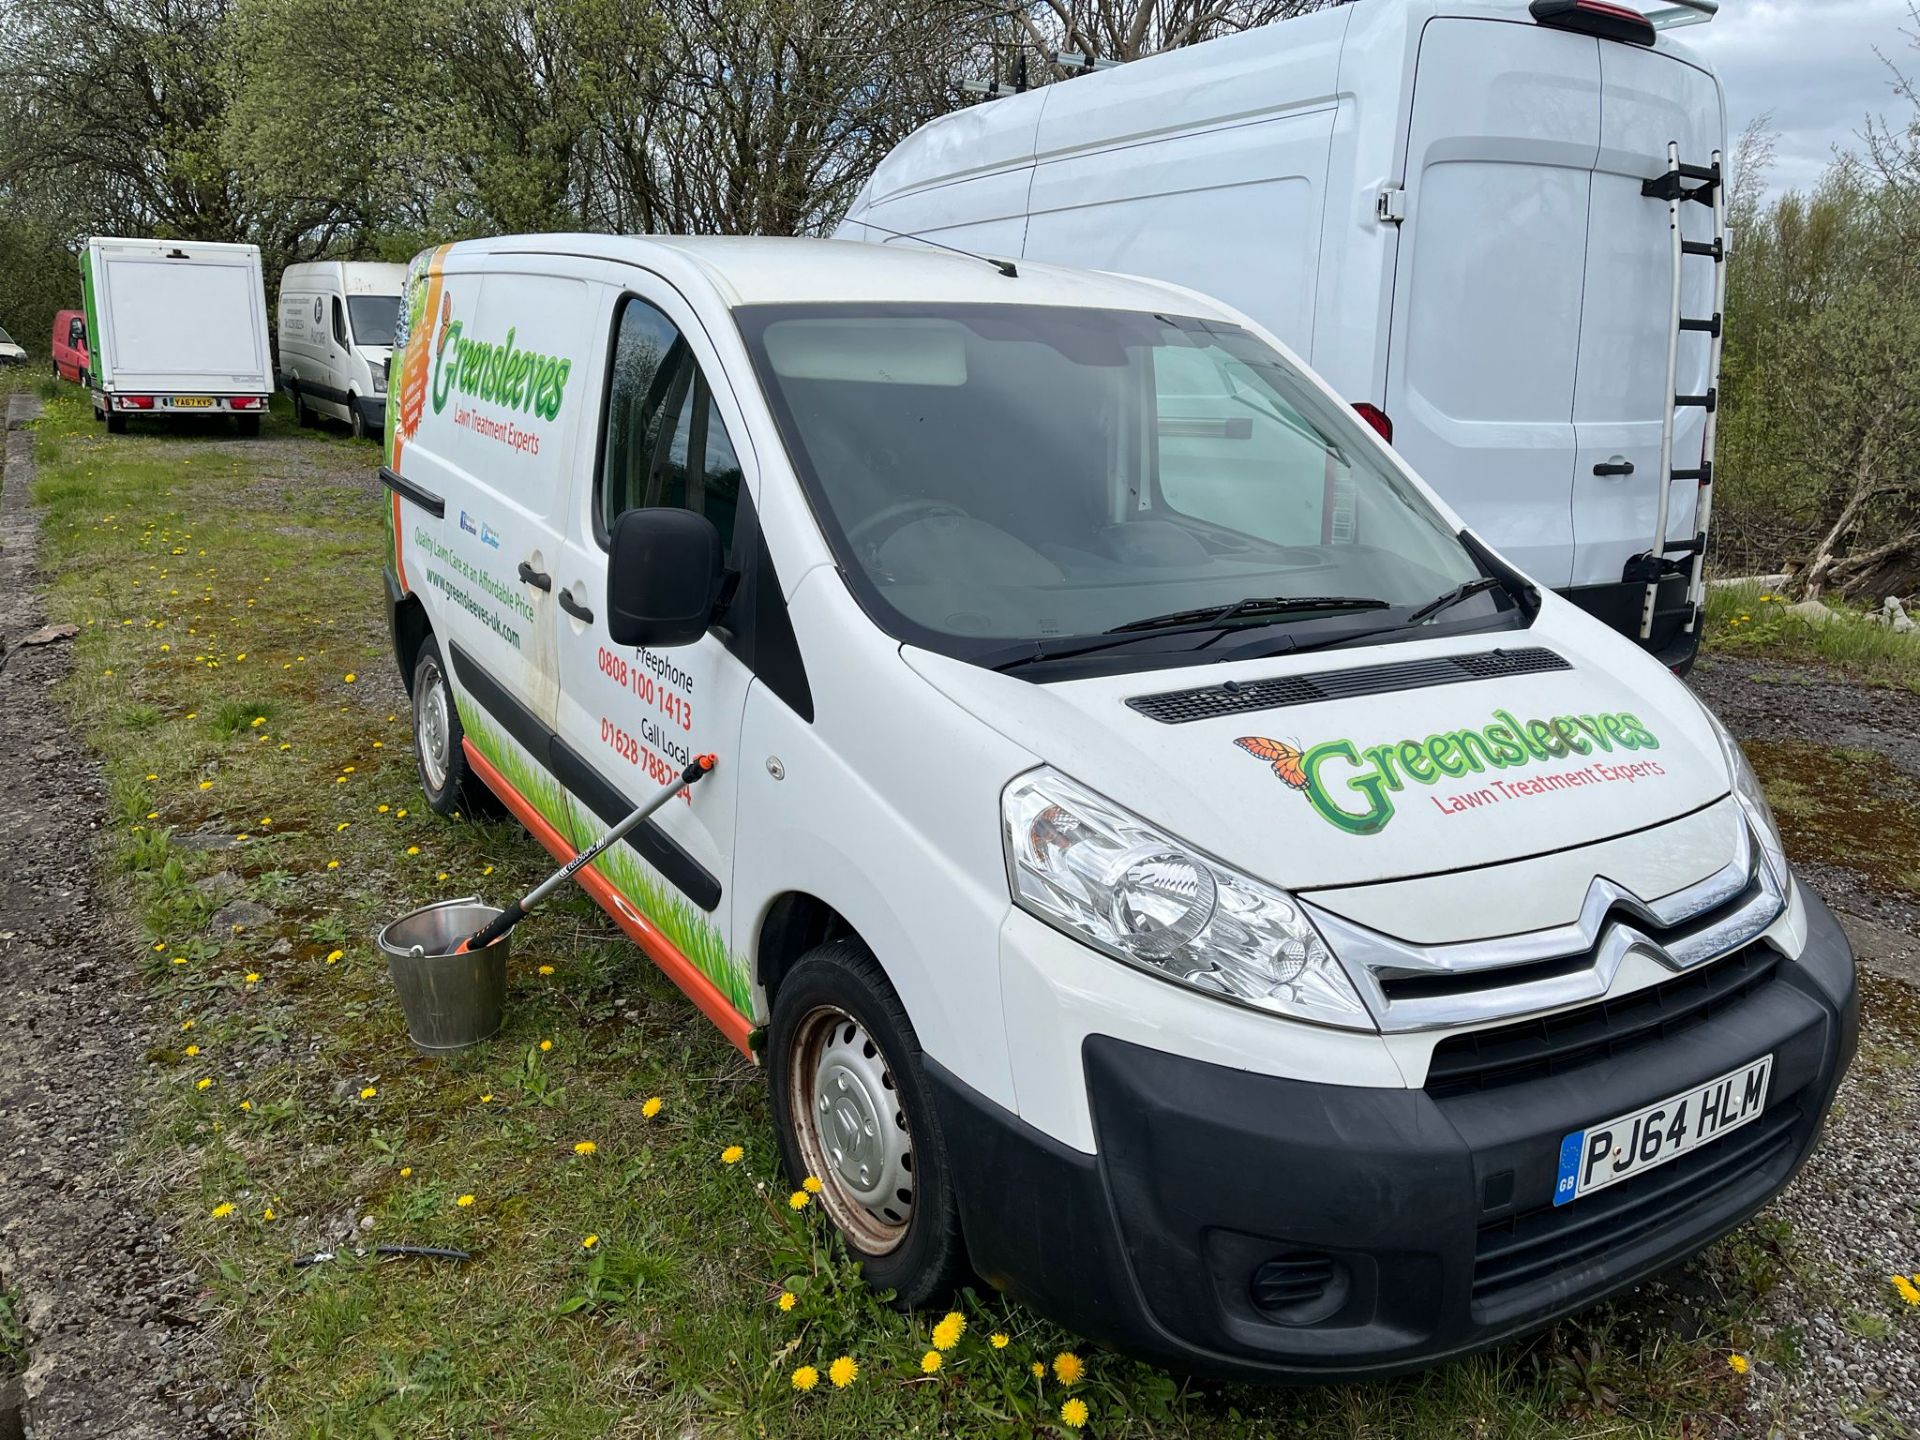 (NO VAT ON HAMMER) >>>SPECIAL CLEARANCE<<< 2014 CITROEN DISPATCH 1000 L1H1 1.6 HDI - NON-RUNNER